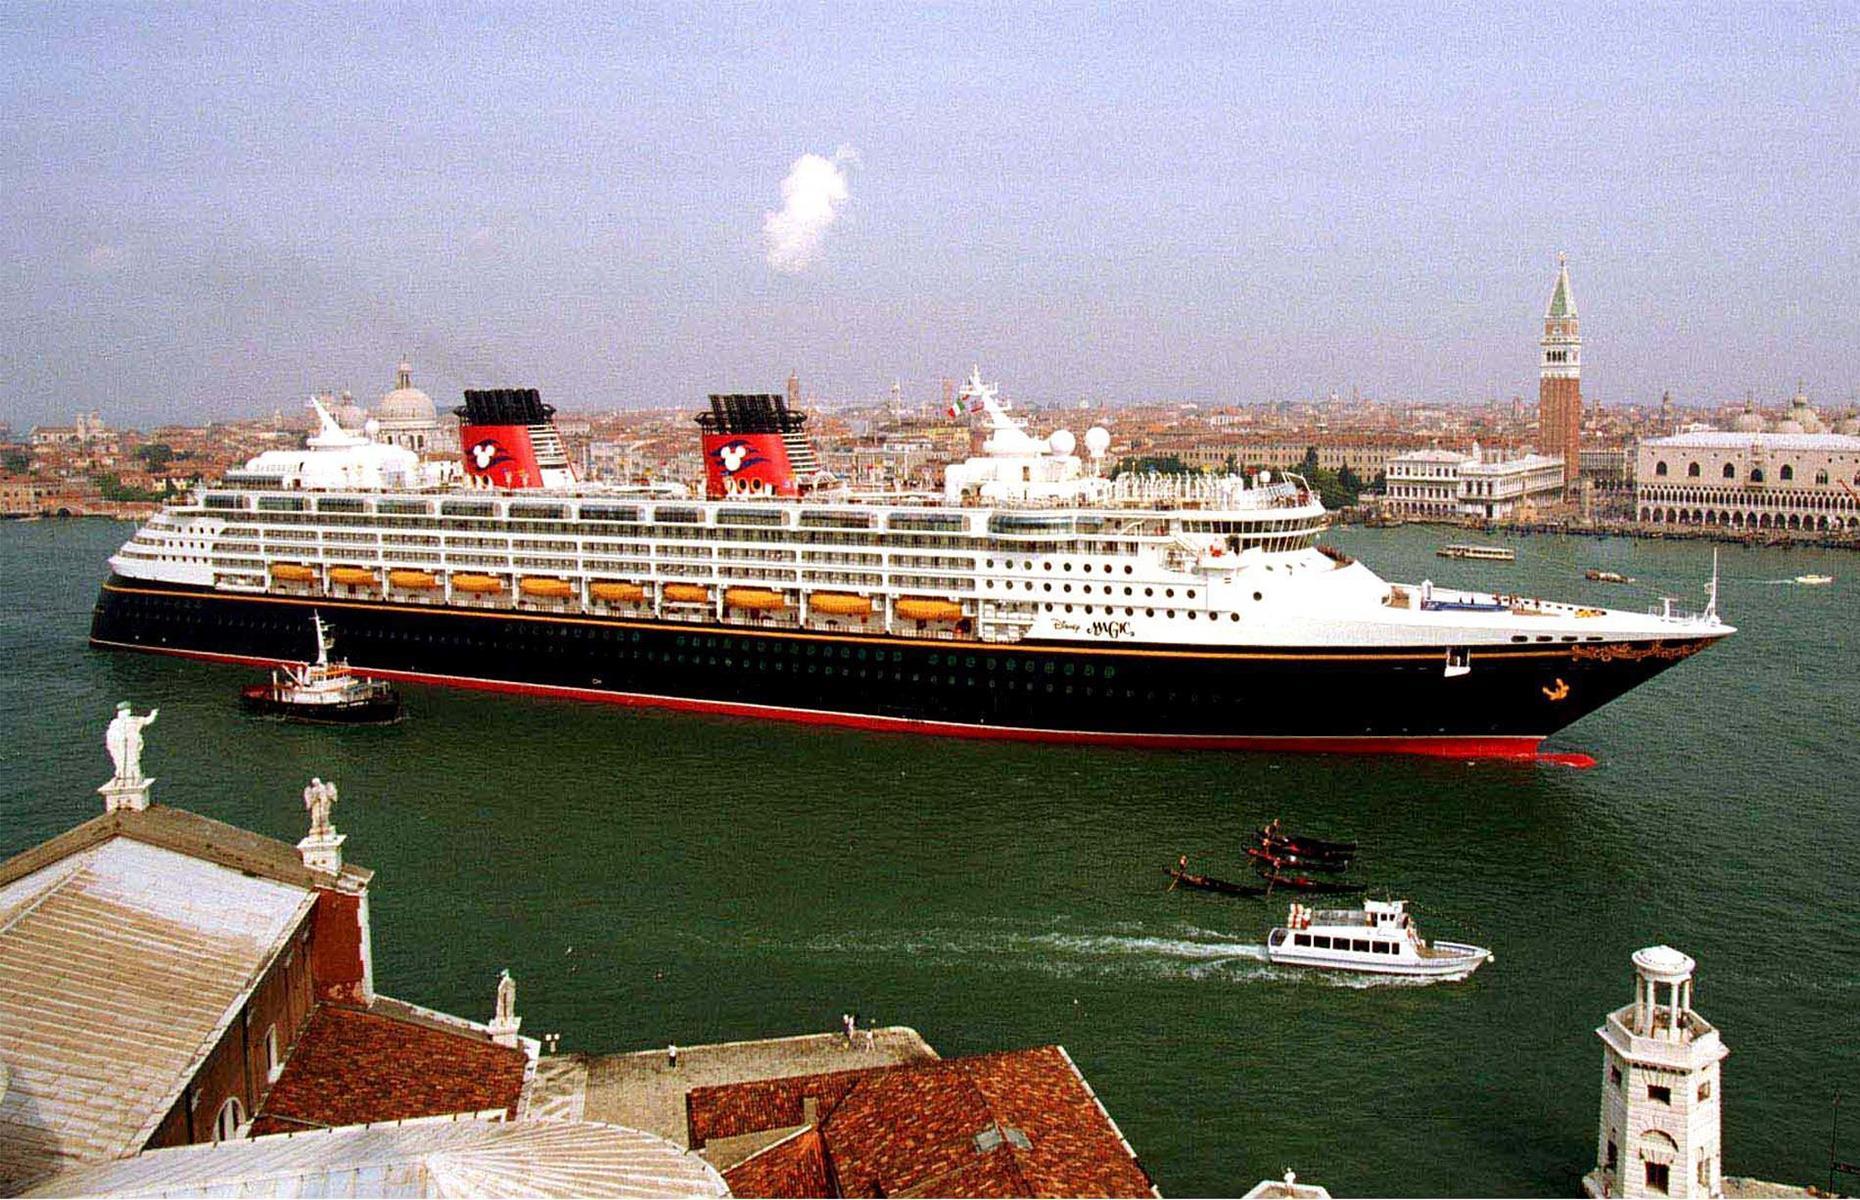 By the 1990s Disney was spreading a little magic at sea. Disney Magic, a bold ship with black, yellow and red detailing à la Mickey Mouse, made its maiden voyage in 1998. It's pictured here that same year, cruising through Venice, and is still sailing today, complete with a spa, pools and plenty of shops and themed dining rooms.